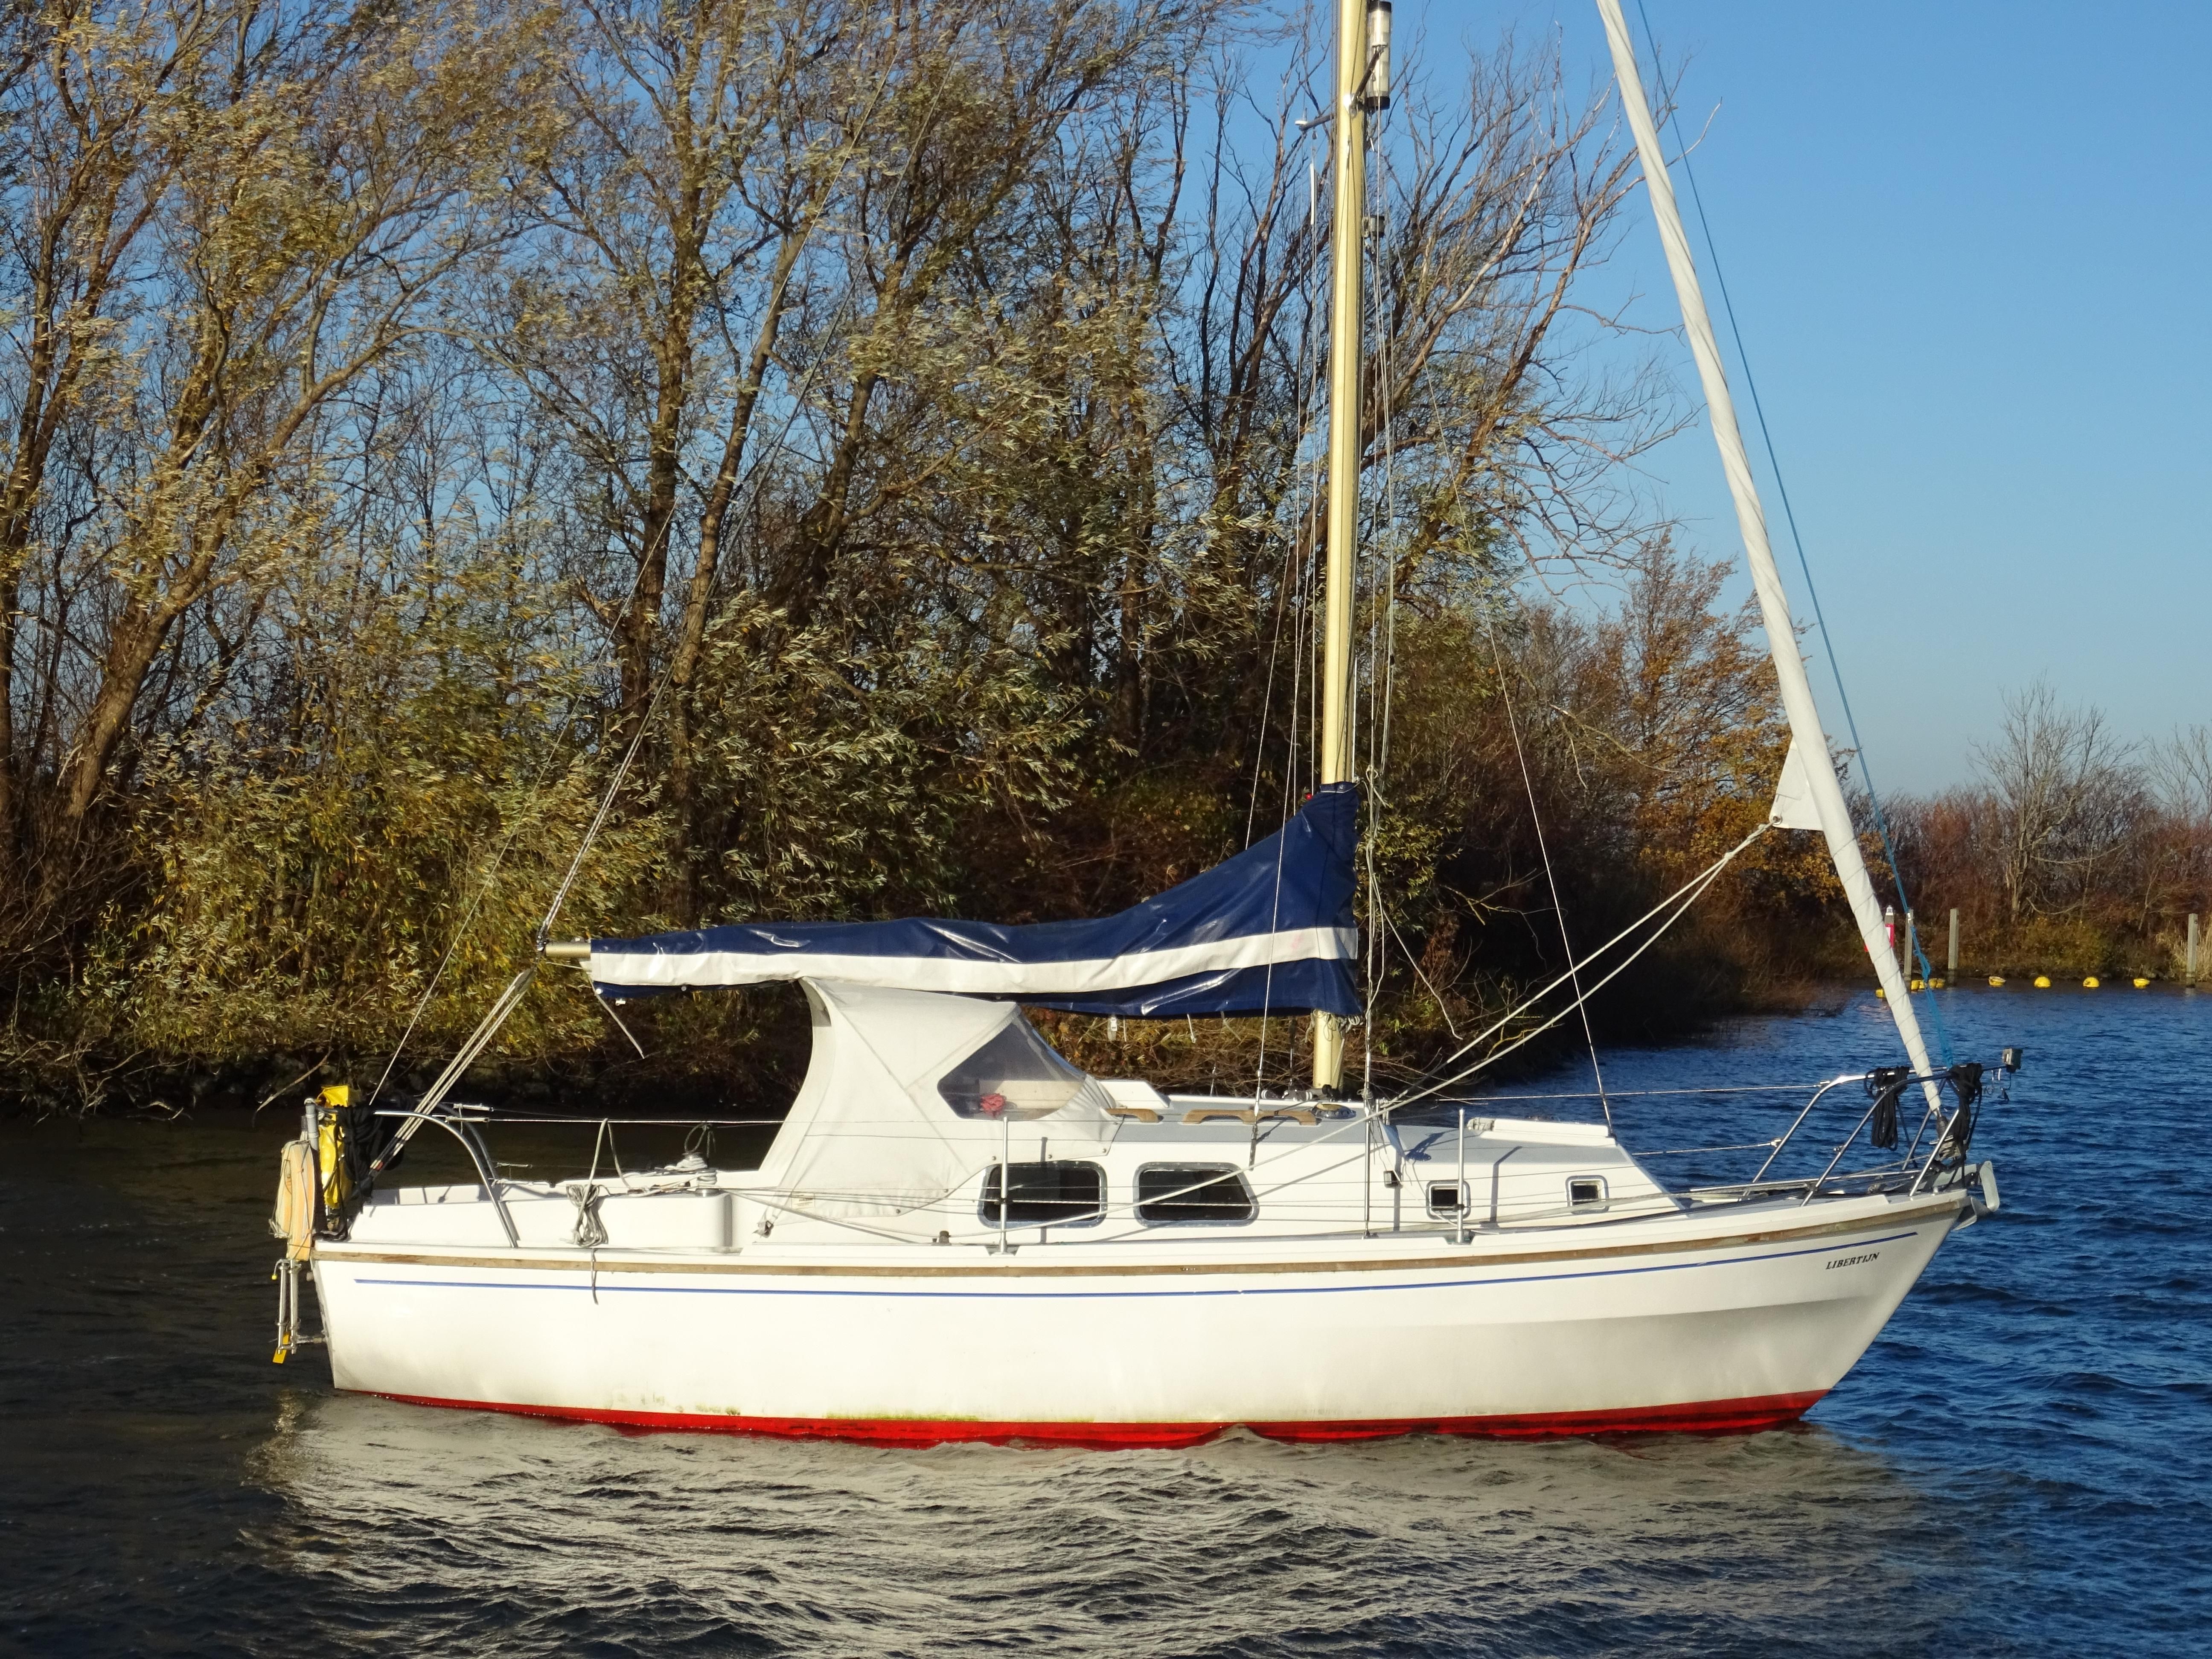 westerly yacht for sale